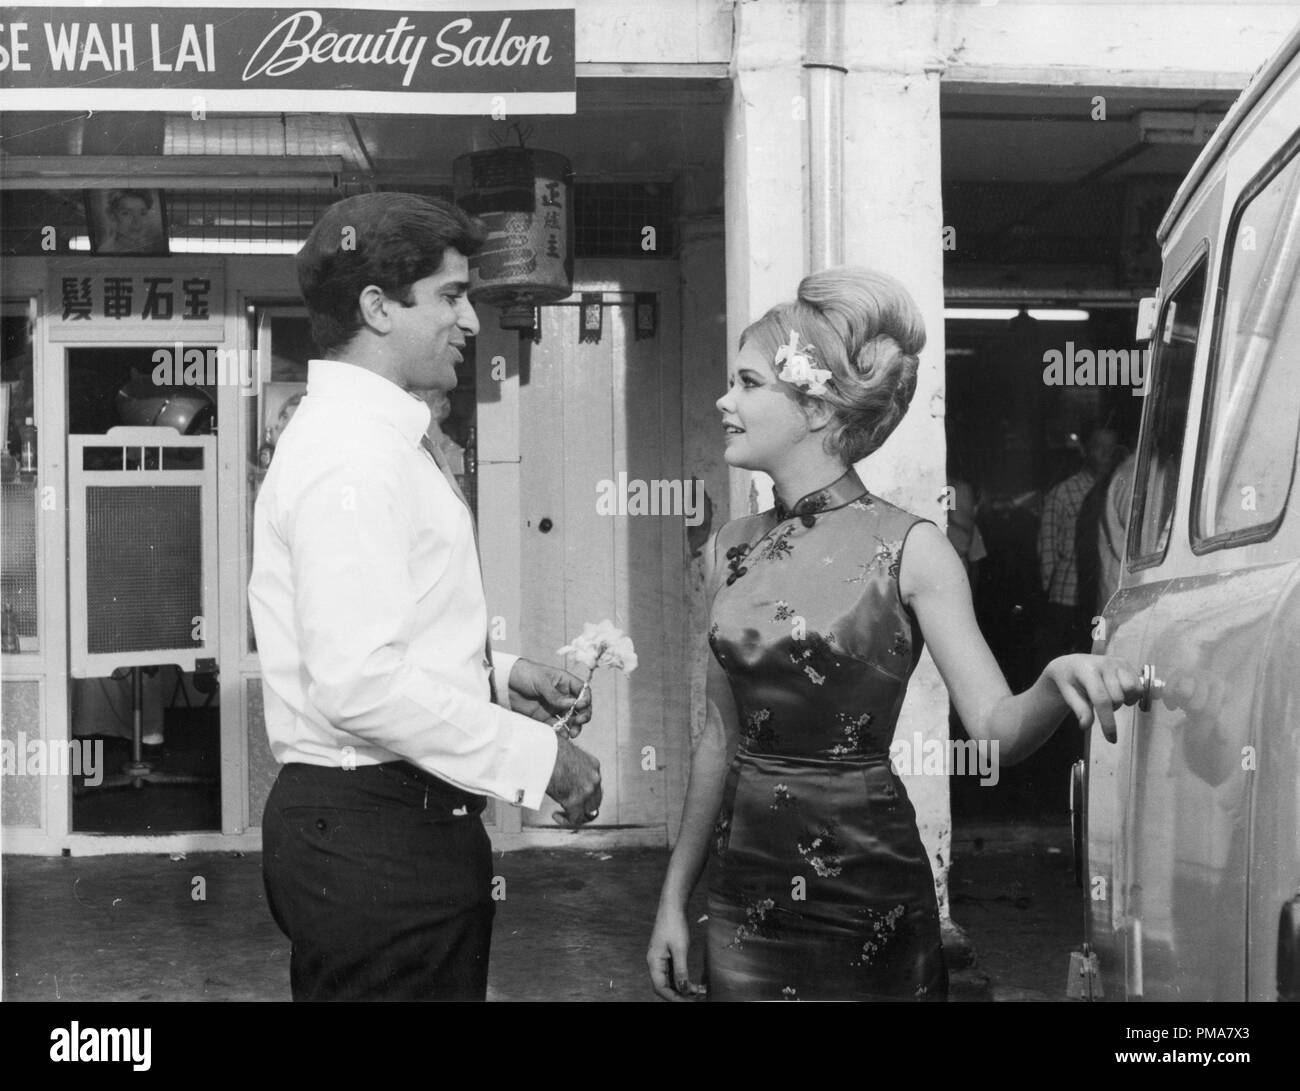 https://c8.alamy.com/comp/PMA7X3/hayley-mills-and-shashie-kapoor-on-the-set-of-pretty-polly-1967-jrc-the-hollywood-archive-all-rights-reserved-file-reference-32263-851tha-PMA7X3.jpg